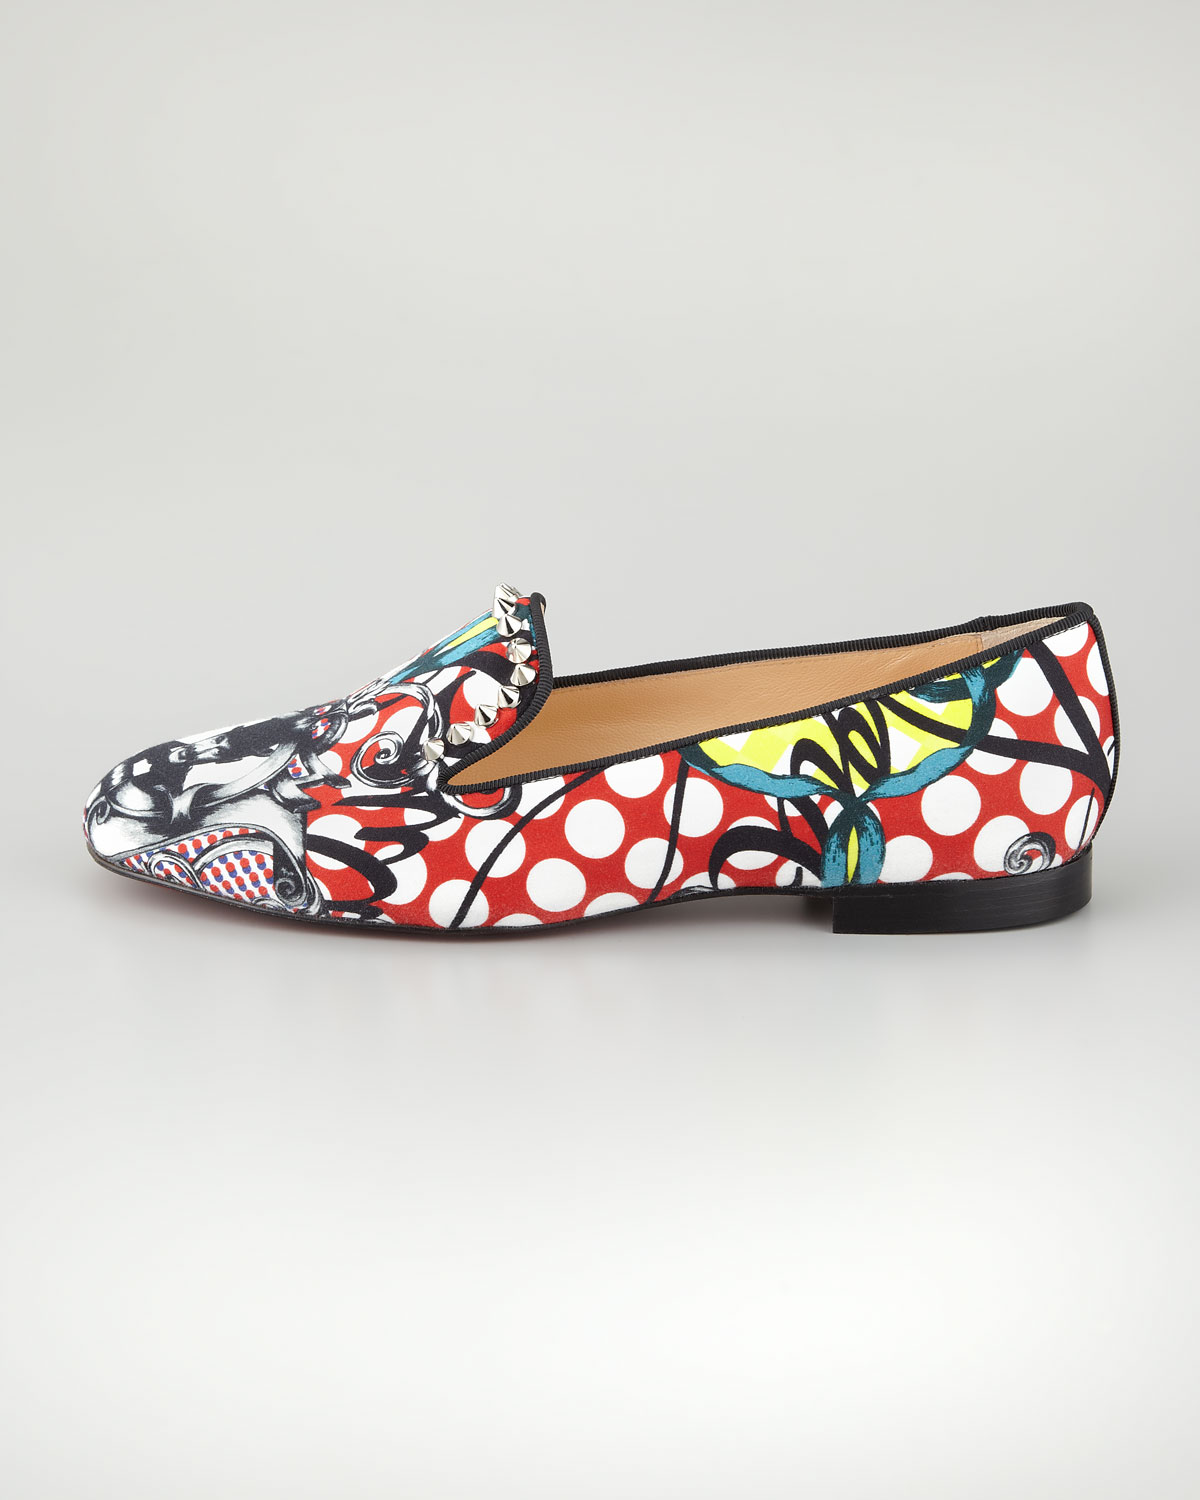 christian louboutins replica shoes - Christian louboutin Sakouette Face Polkadot Fabric Loafer in ...